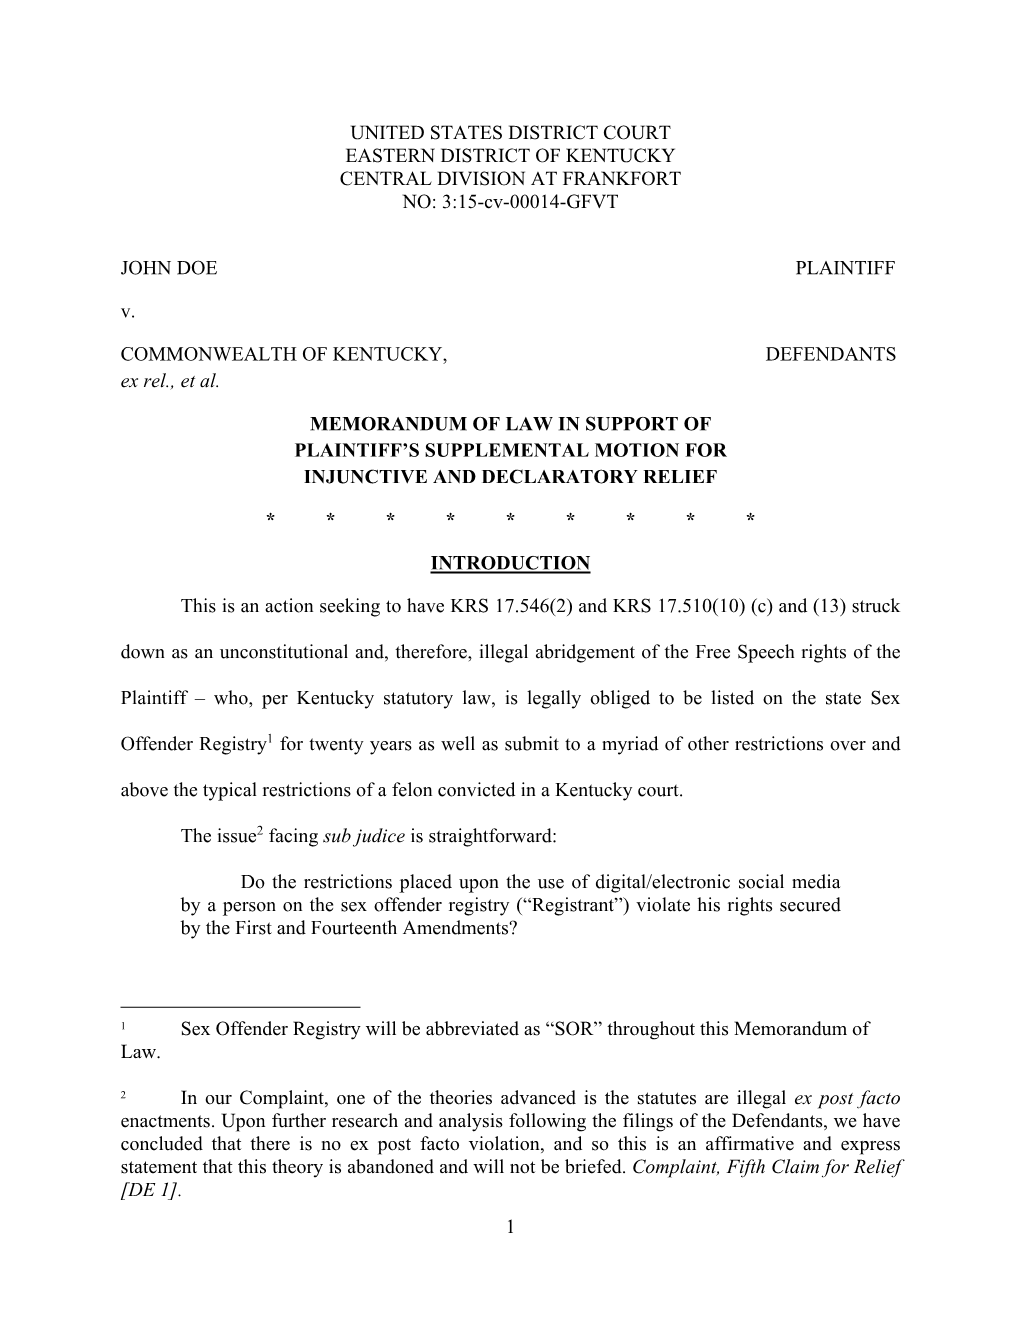 Memorandum of Law in Support of Supplemental Motion for Injunctive and Declaratory Relief